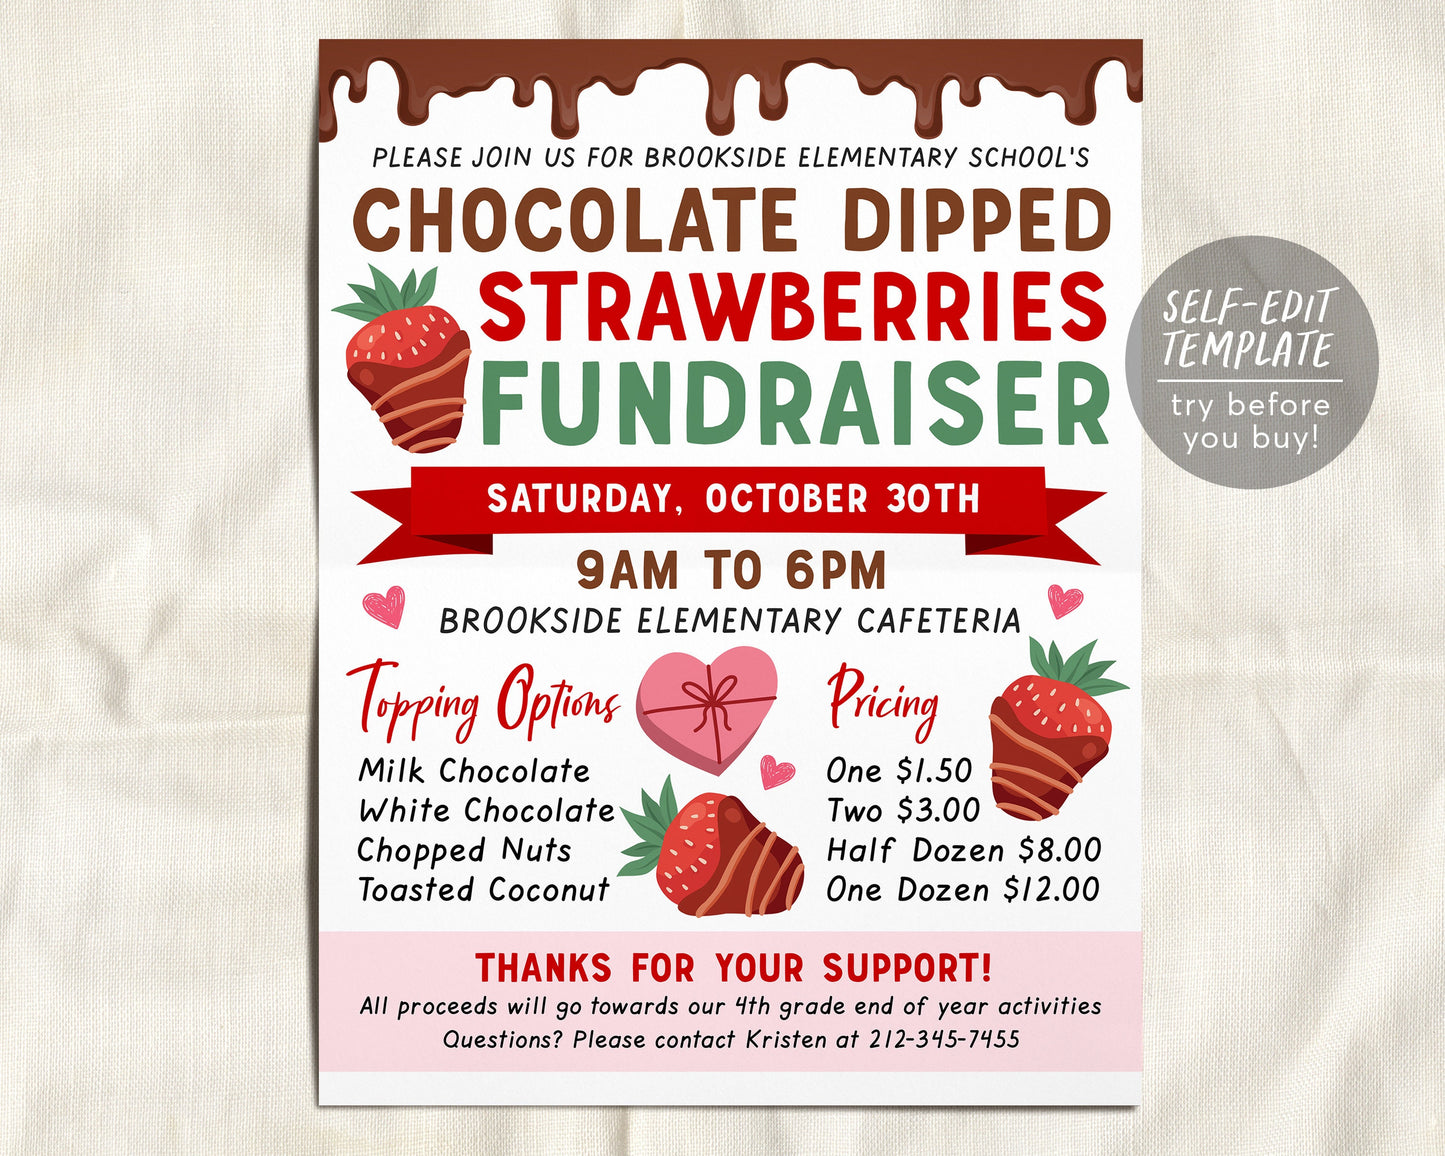 Valentine Chocolate Covered Strawberries Fundraiser Flyer Editable Template, Dipped Strawberry School PTA PTO Flyer, Church Event Charity